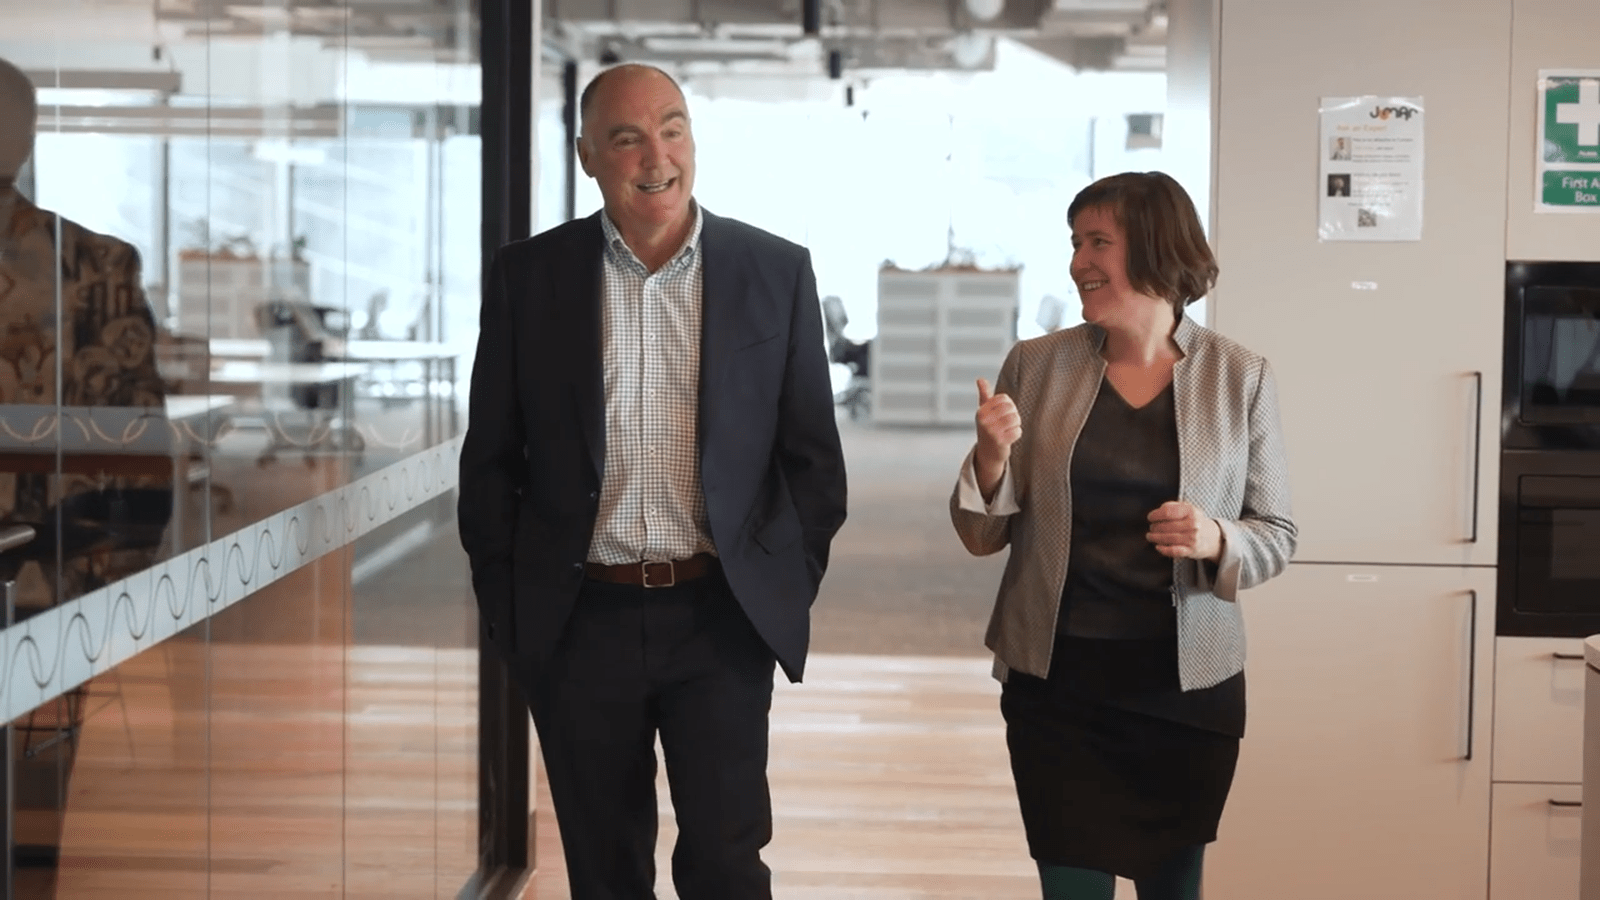 Dr. Andrew Nash, Chief Scientific Officer, Senior Vice President Head of Research at CSL, walks with Camille Shanahan, General Manager of Jumar Bioincubator.